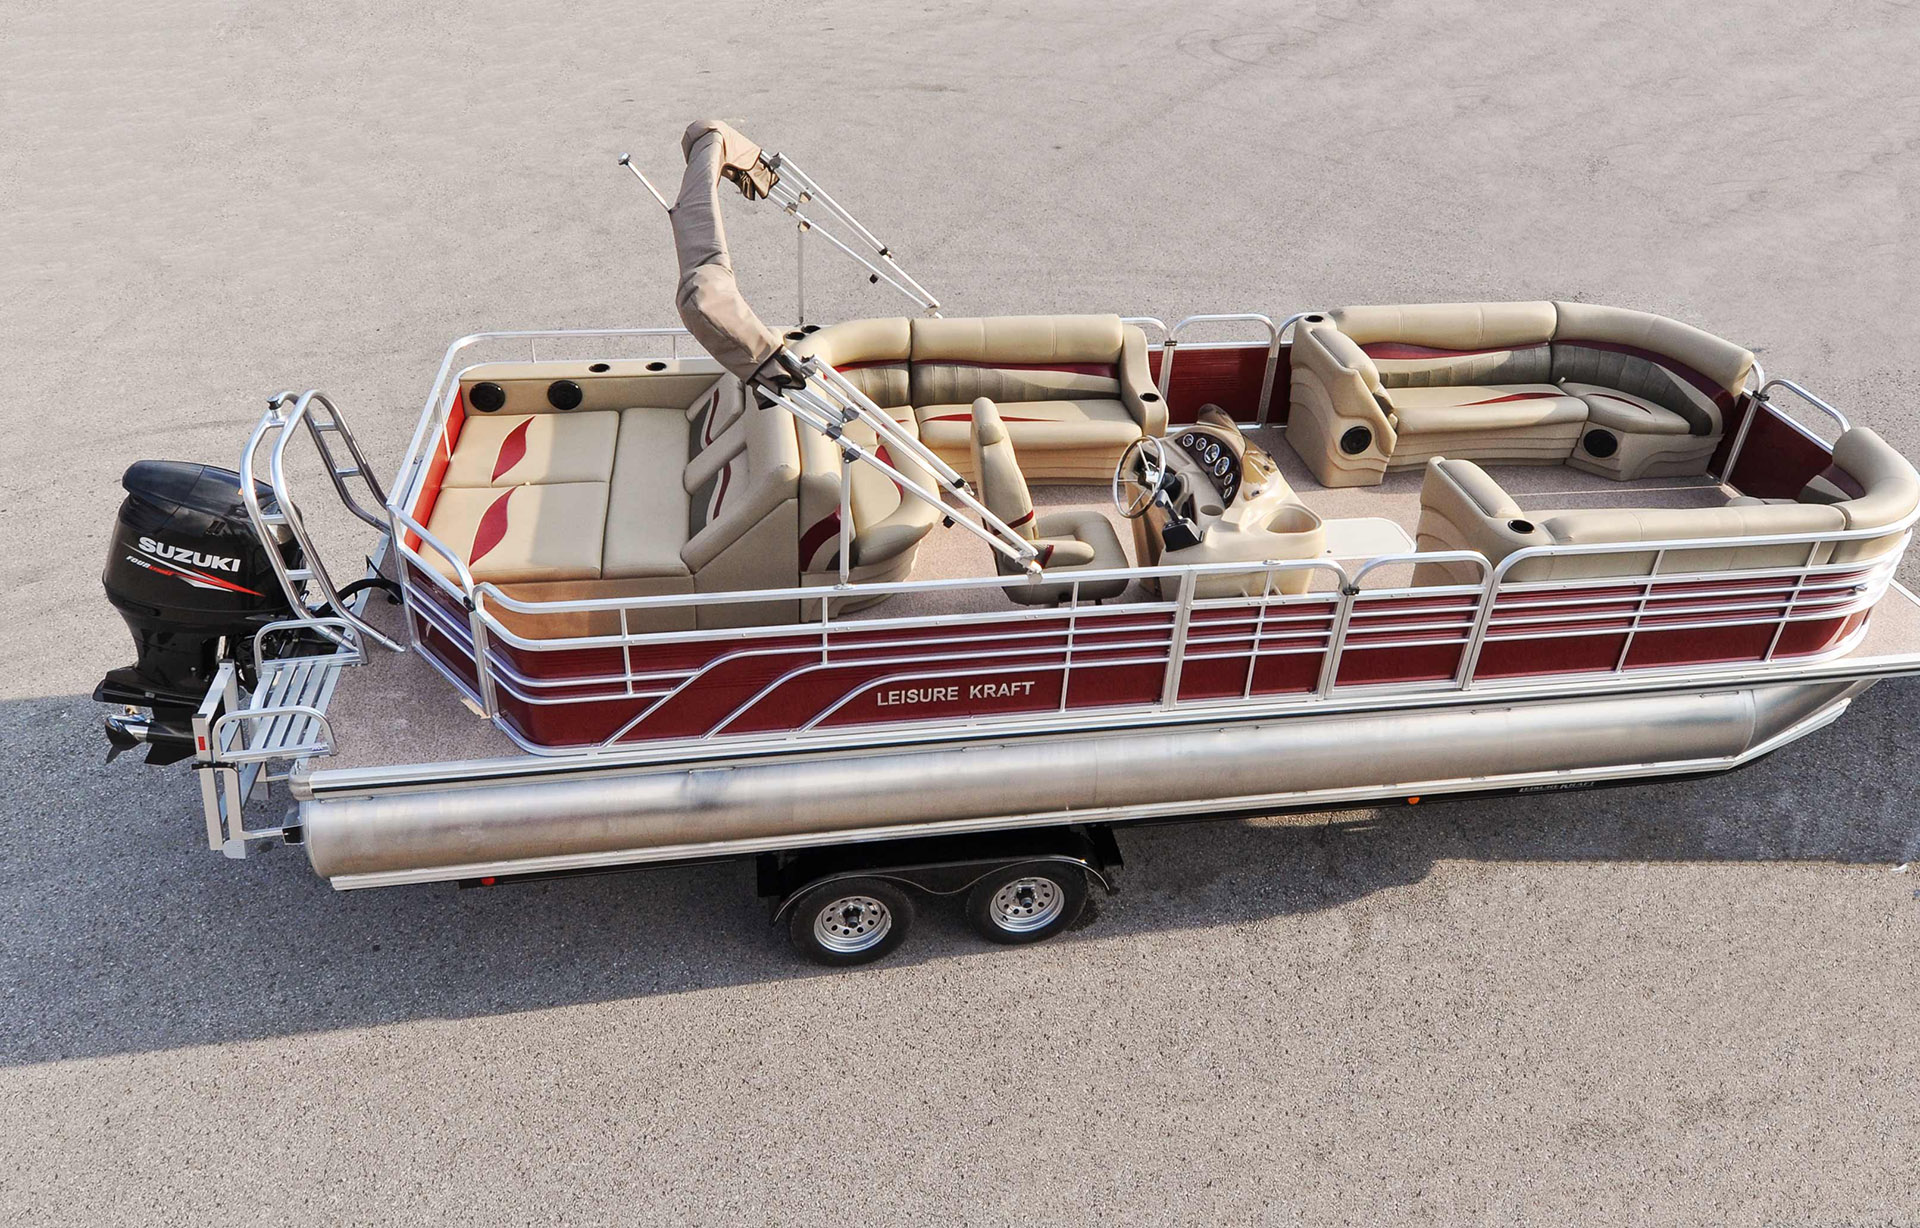 ... - 20 Years of Experience as a High Quality Pontoon Boat Manufacturer